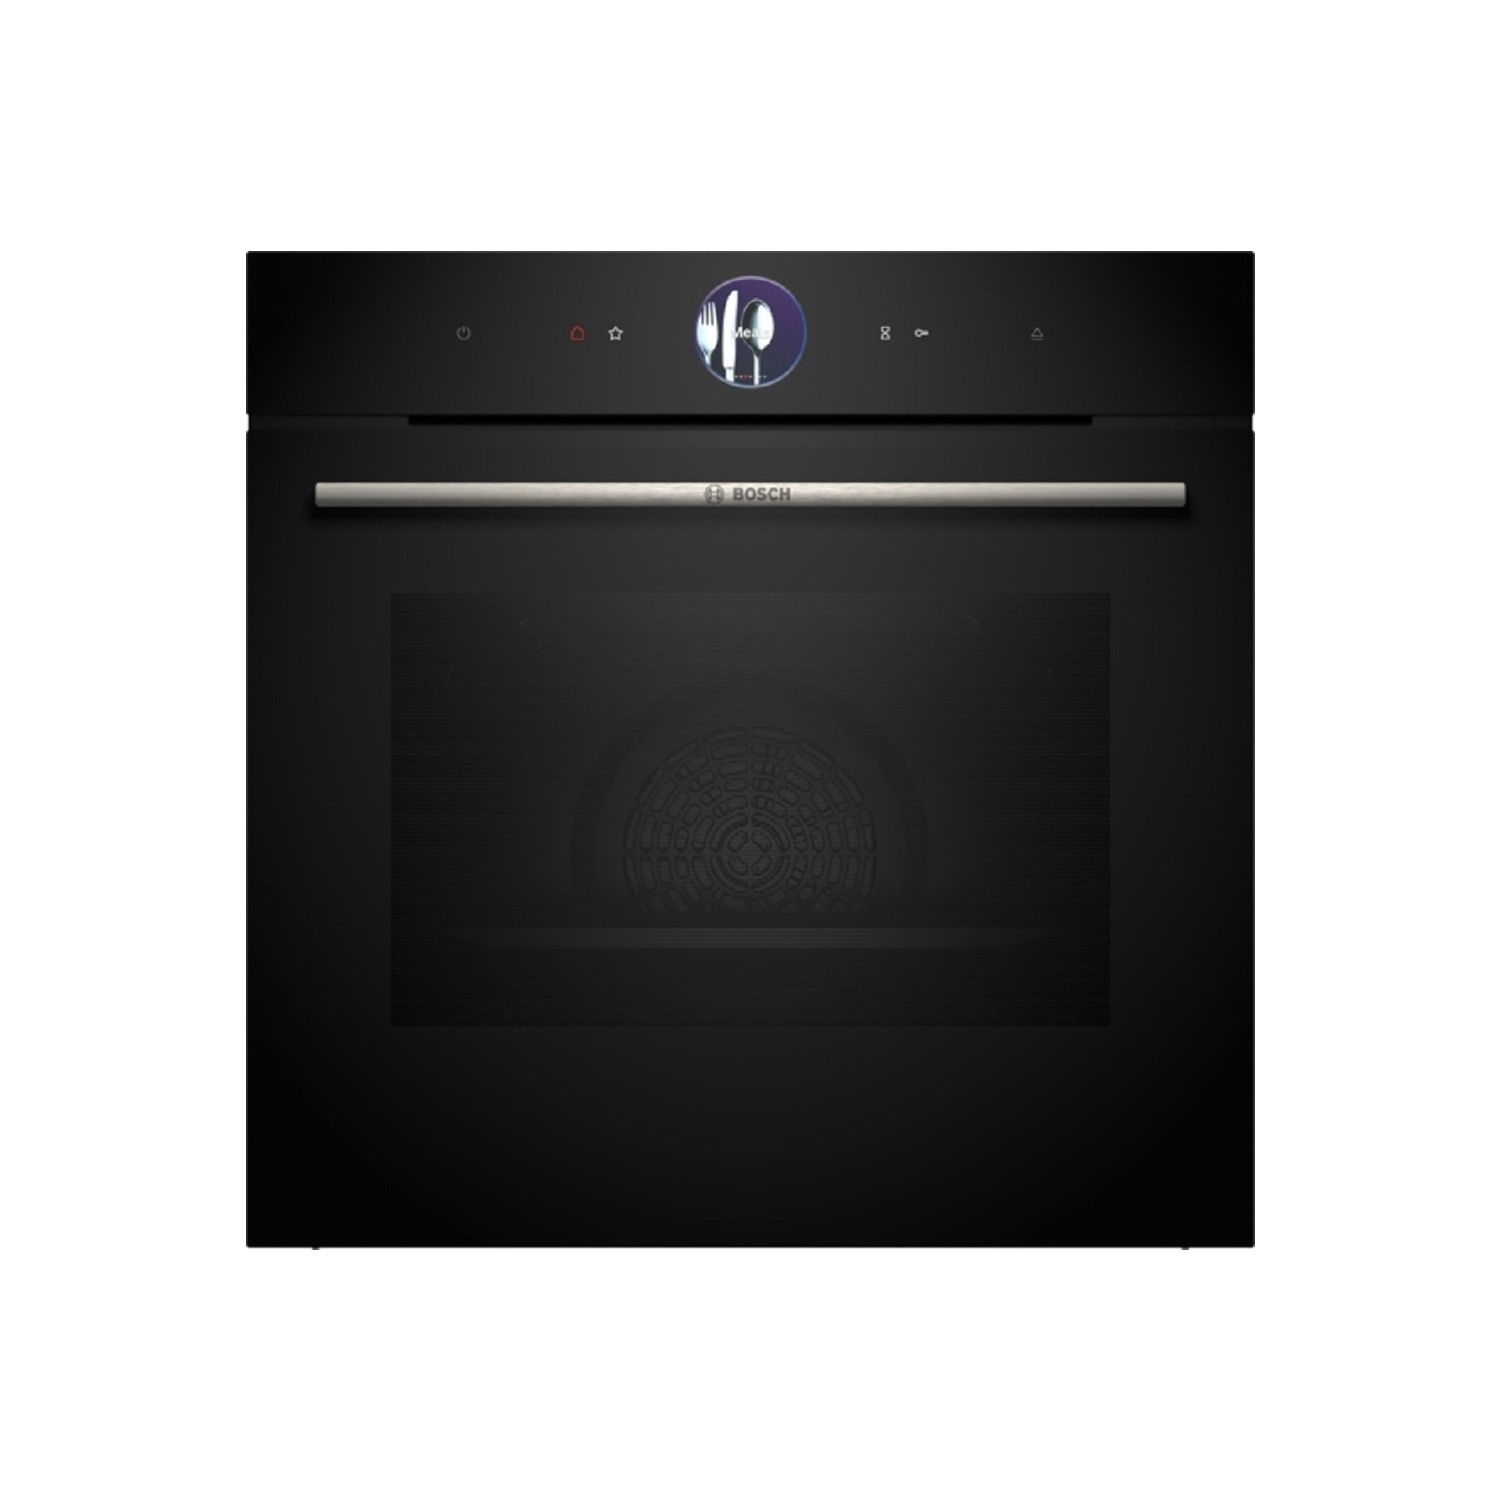 Photos - Oven Bosch Series 8 Electric Single  With Steam Function - Black HSG7364B1B 